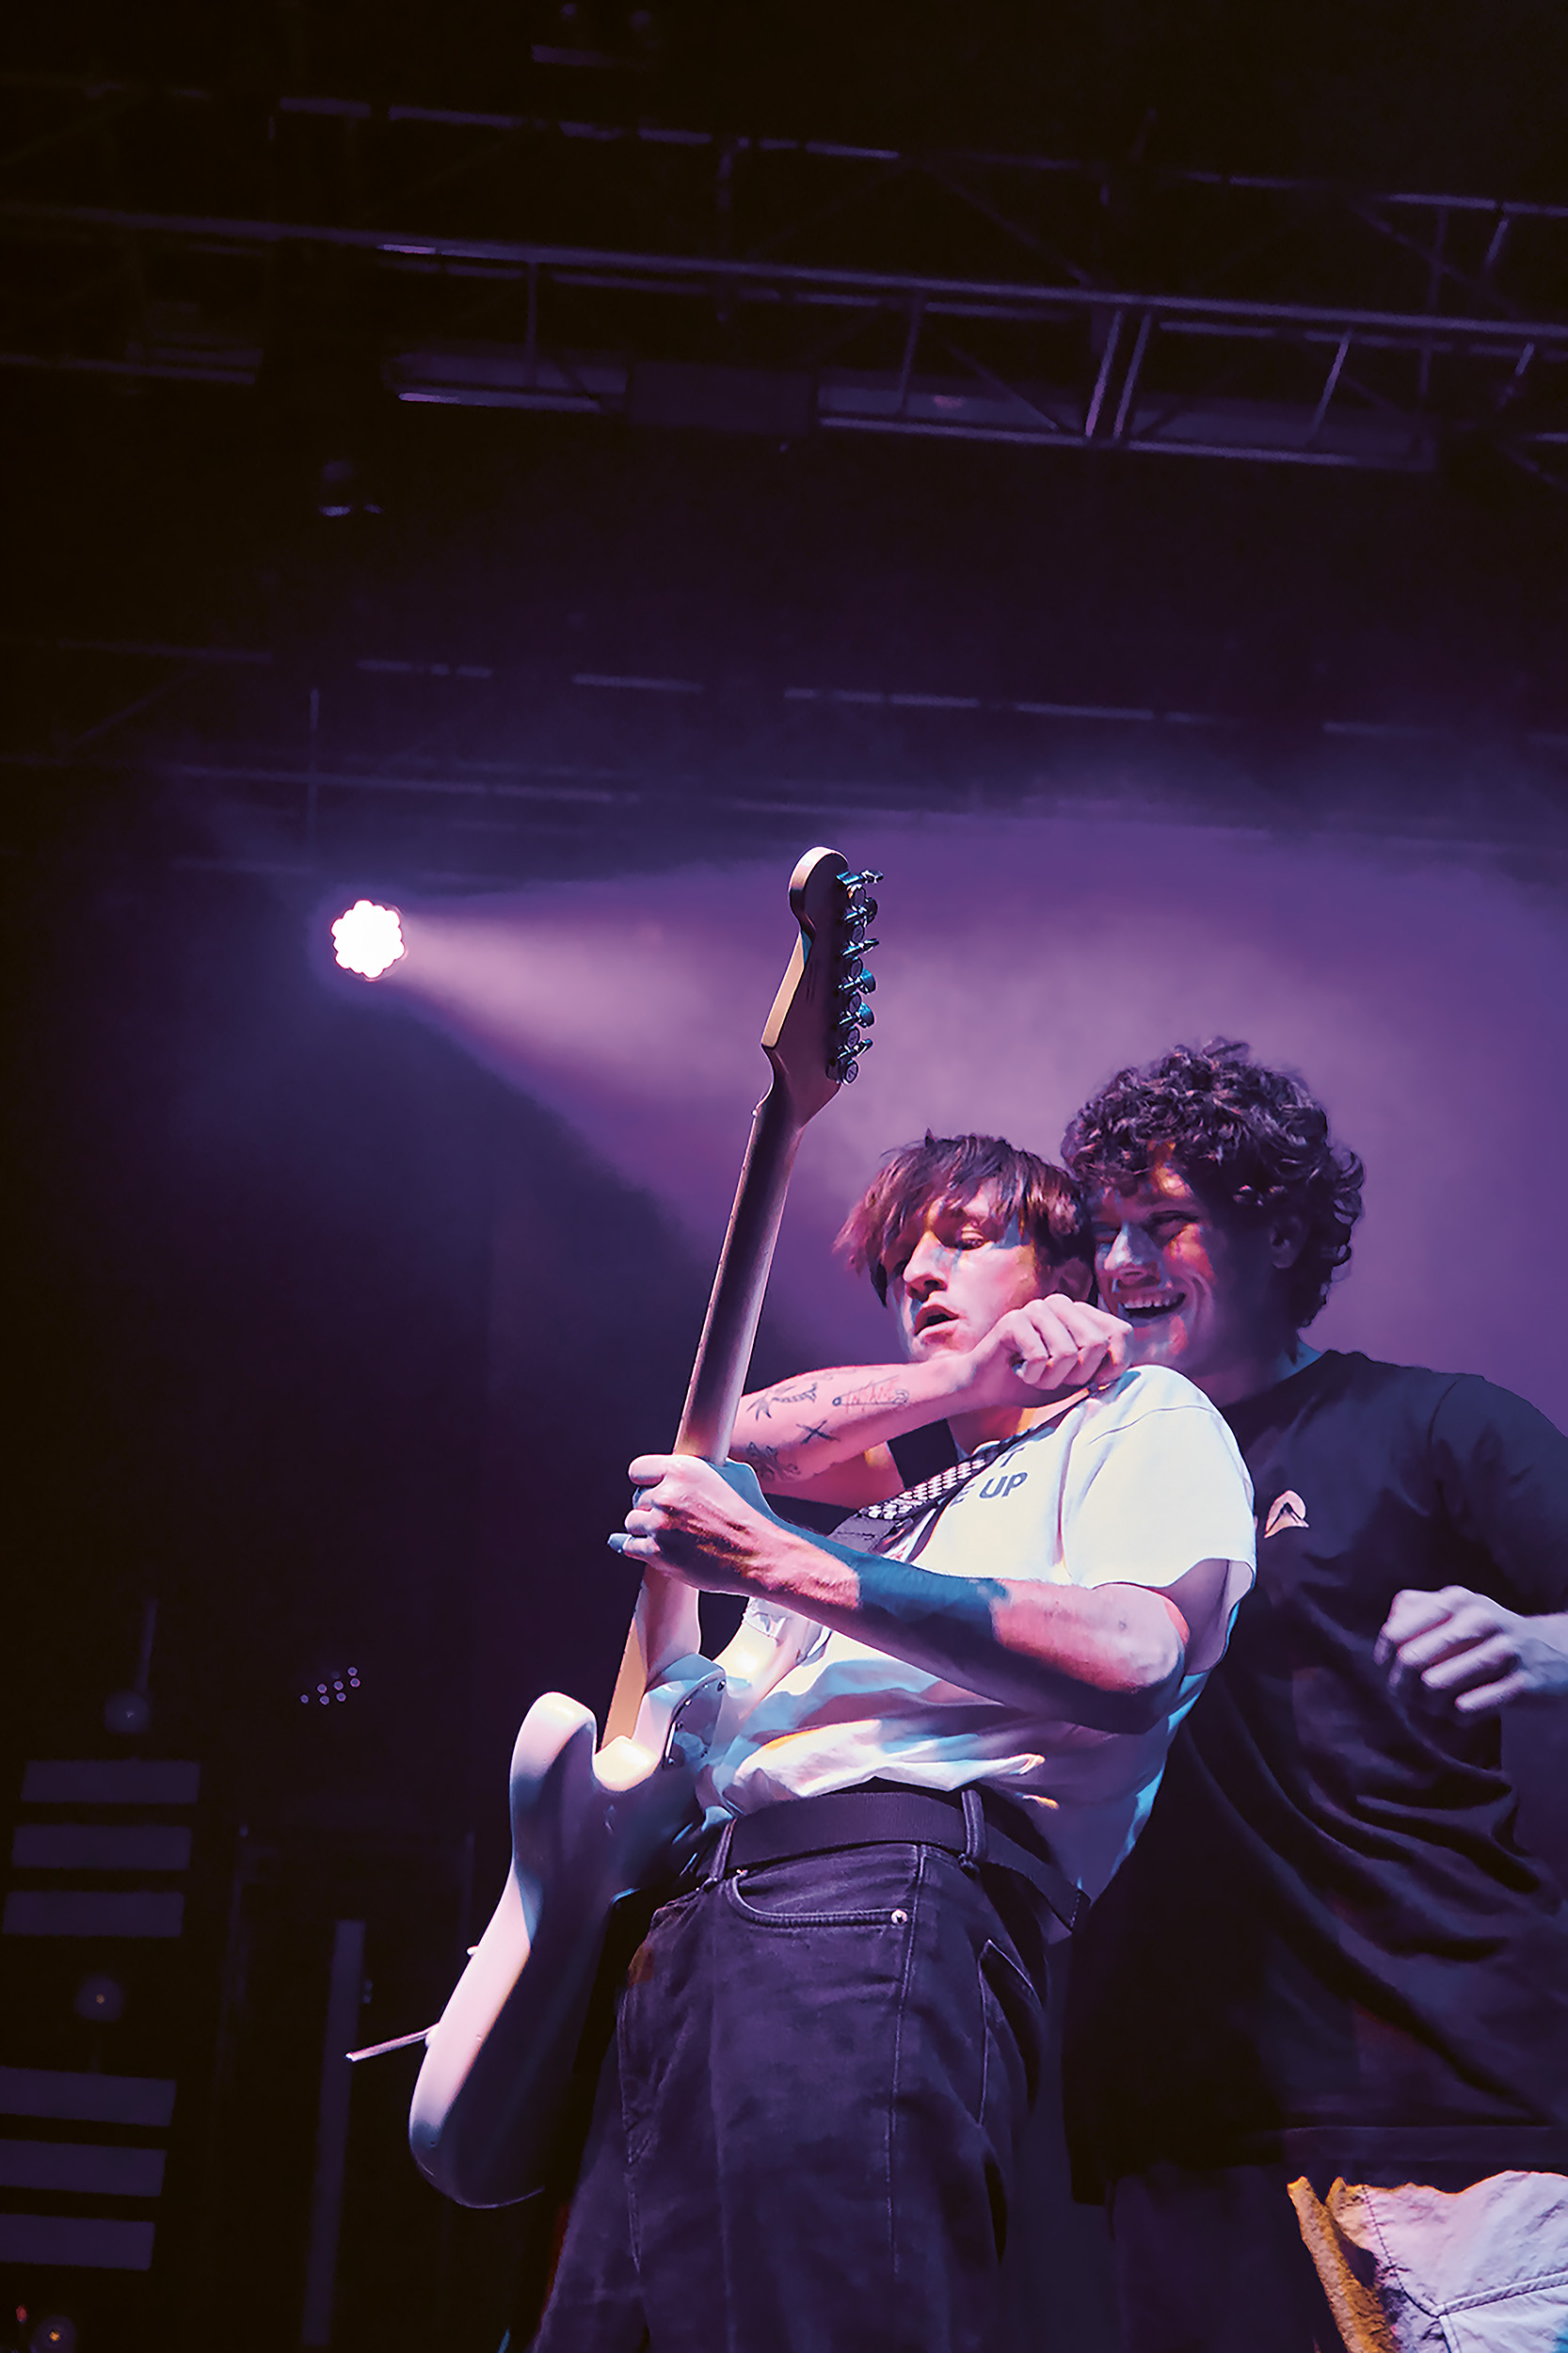 Live Music Photography image by Chloe Sibley depicting the singer hugging the guitarist on stage, smiling